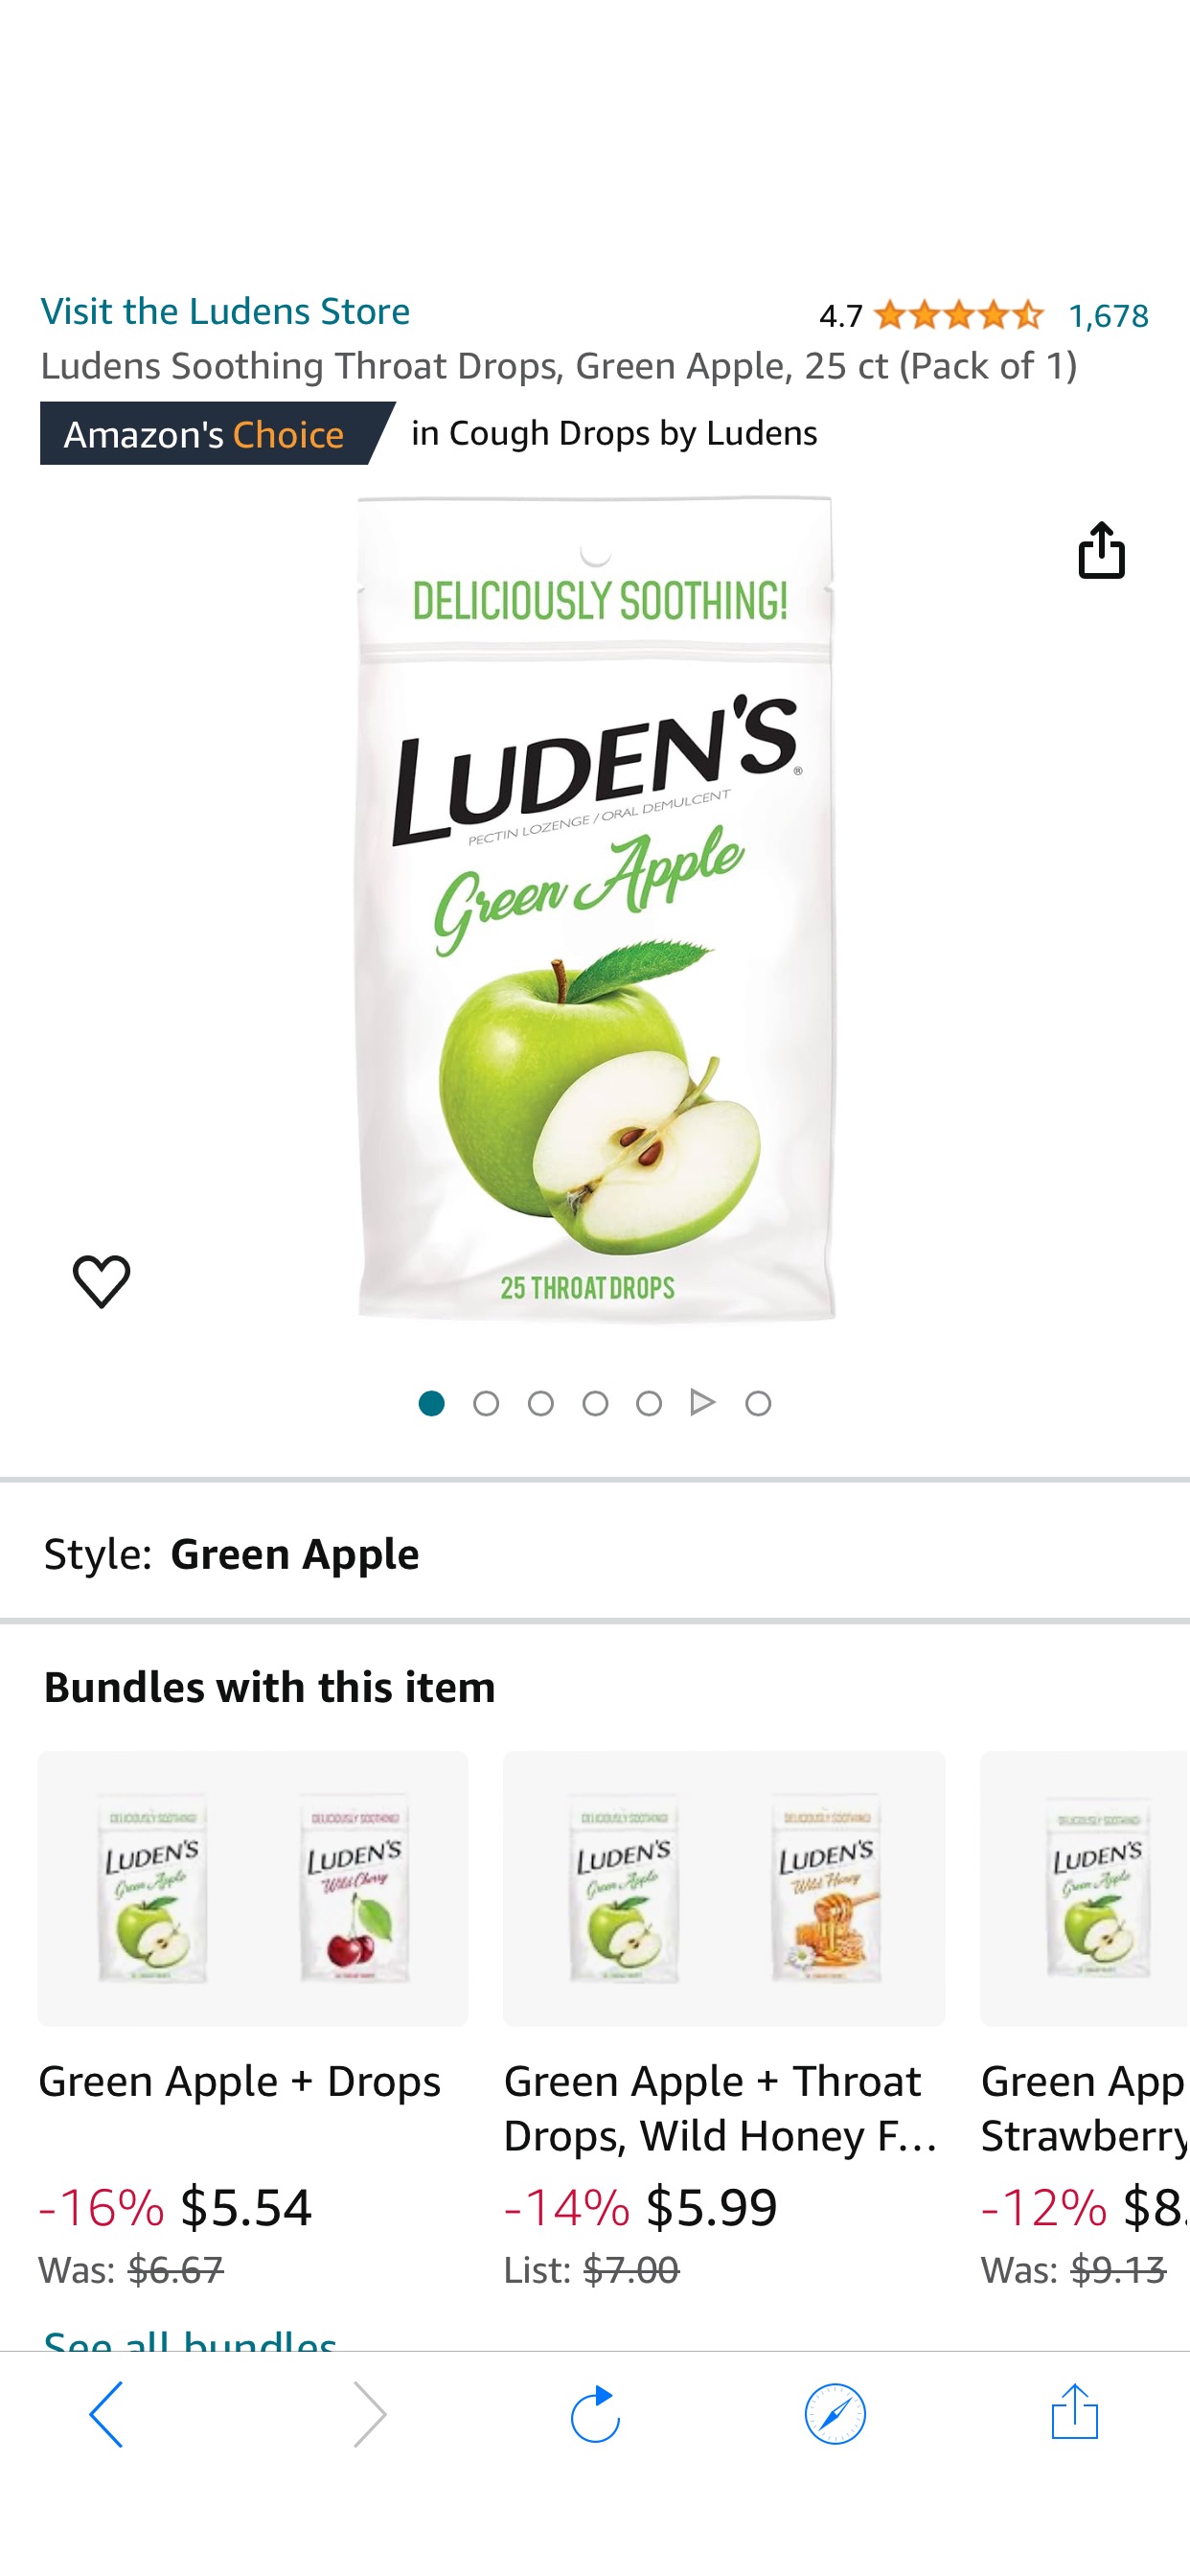 Amazon.com: Ludens Soothing Throat Drops, Green Apple, 25 ct (Pack of 1) : Health & Household喉糖